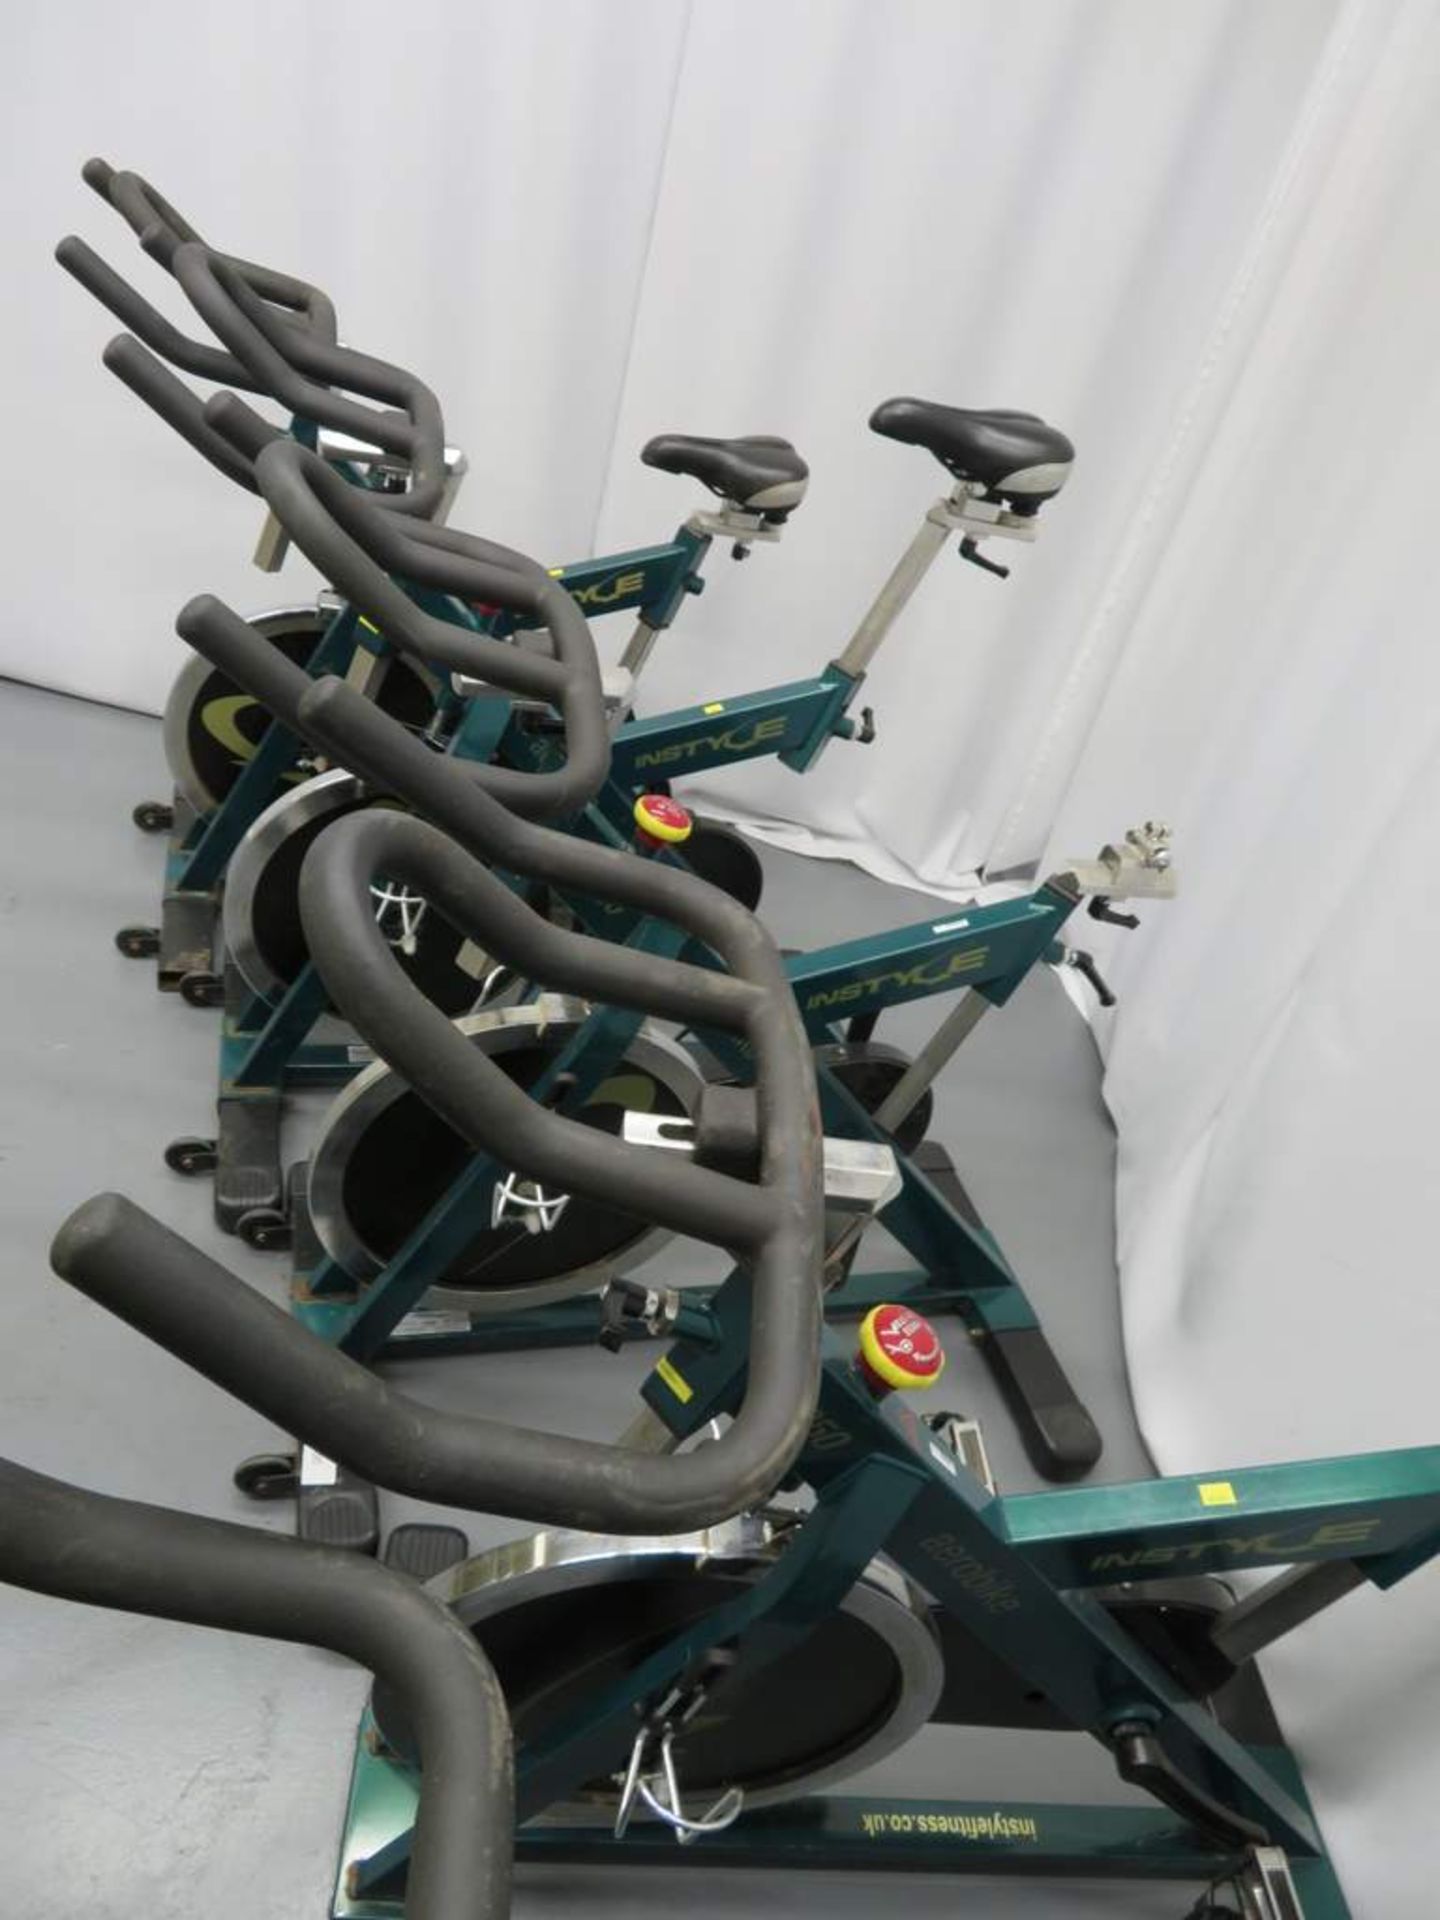 6x InStyle V850 Spin Bike - 1 Missing A Seat. - Image 8 of 9